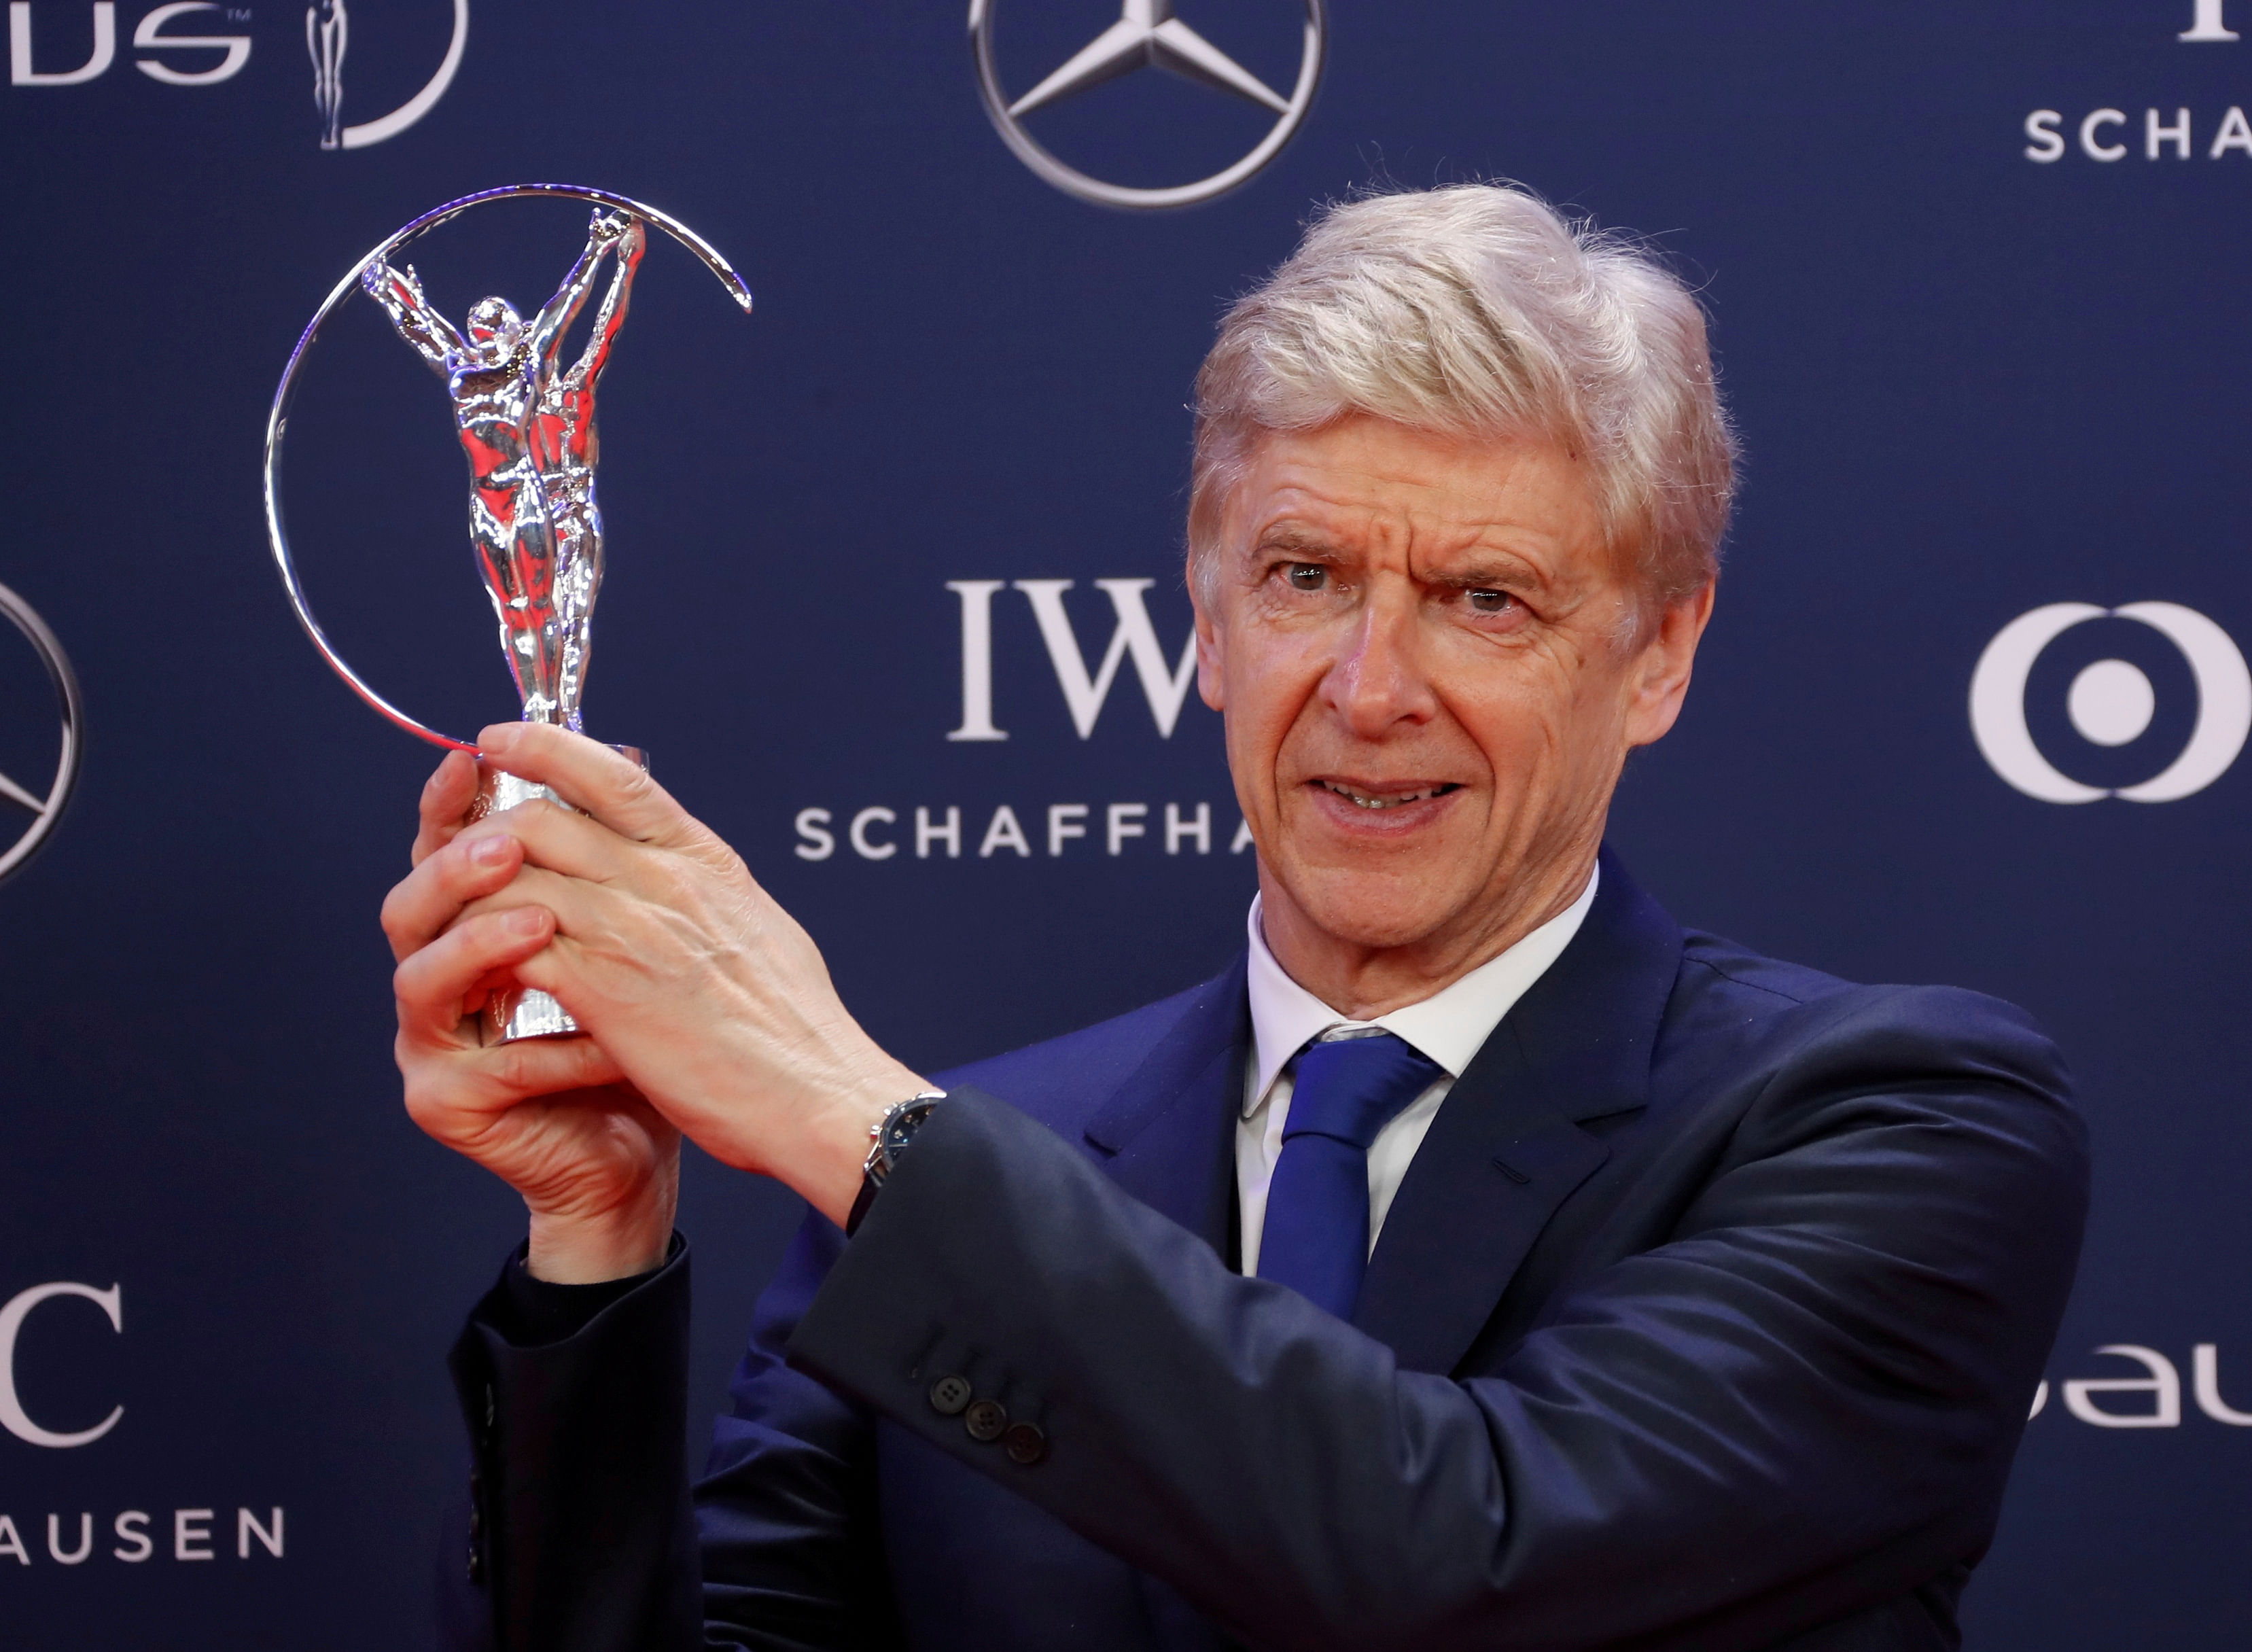 Arsene Wenger poses after winning the Lifetime Achievement Award. (Reuters Photo)